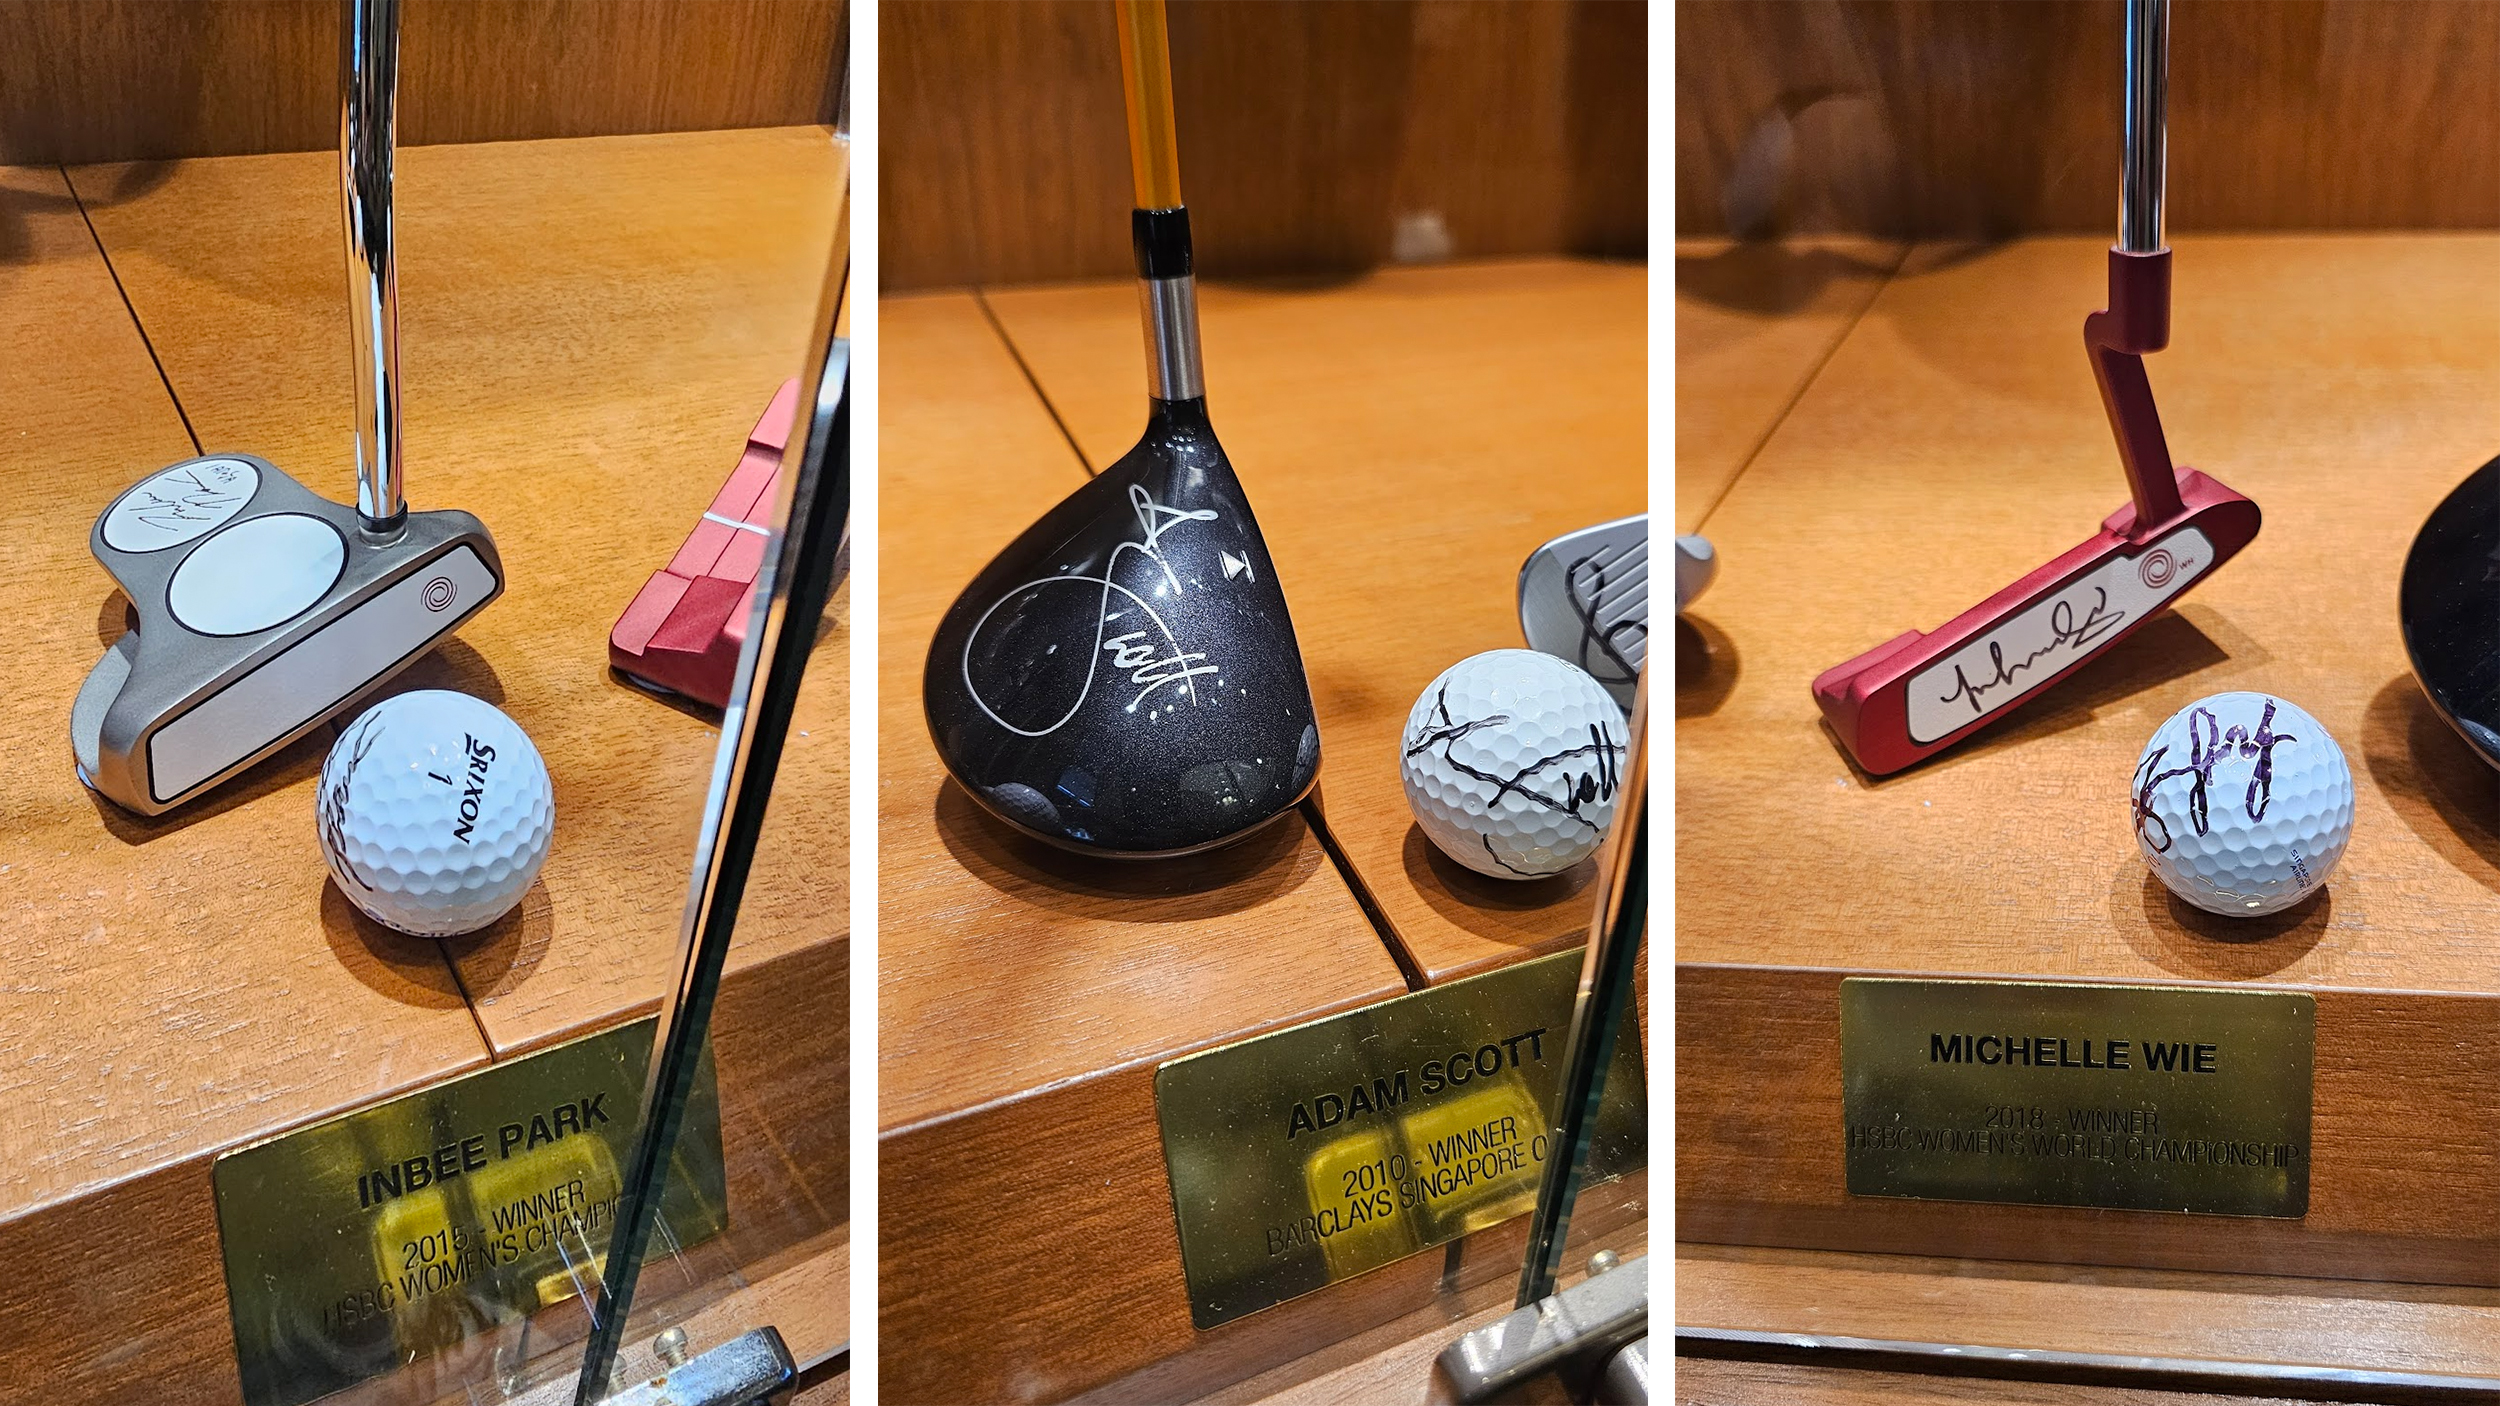 Clubs and balls signed by Sentosa Golf Club champions